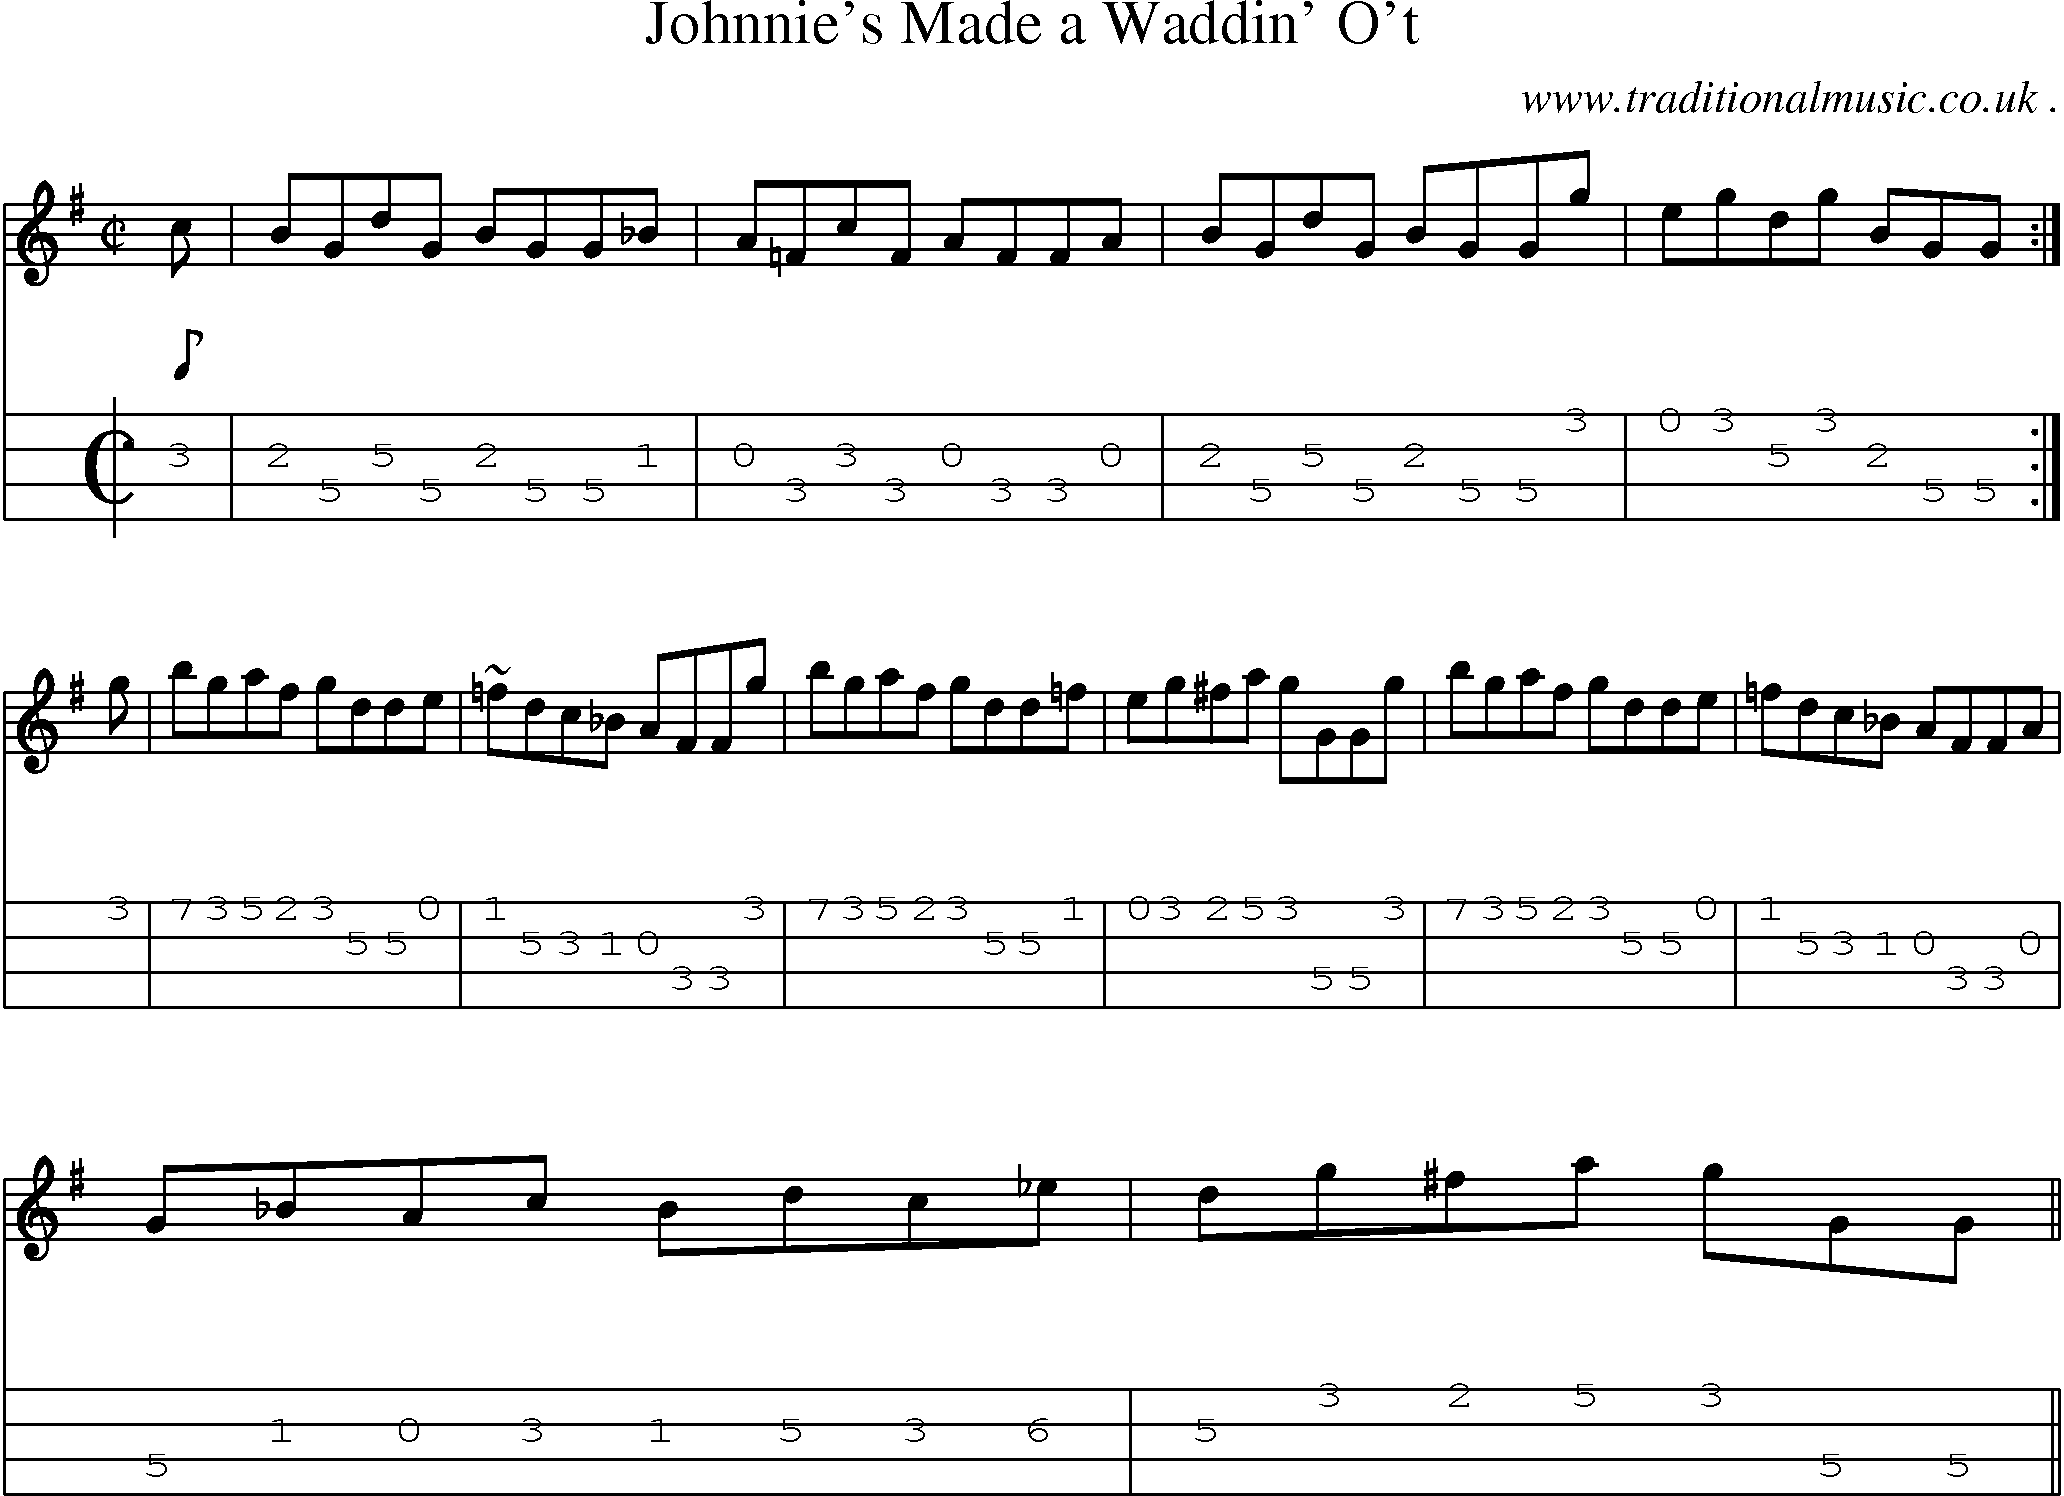 Sheet-music  score, Chords and Mandolin Tabs for Johnnies Made A Waddin Ot